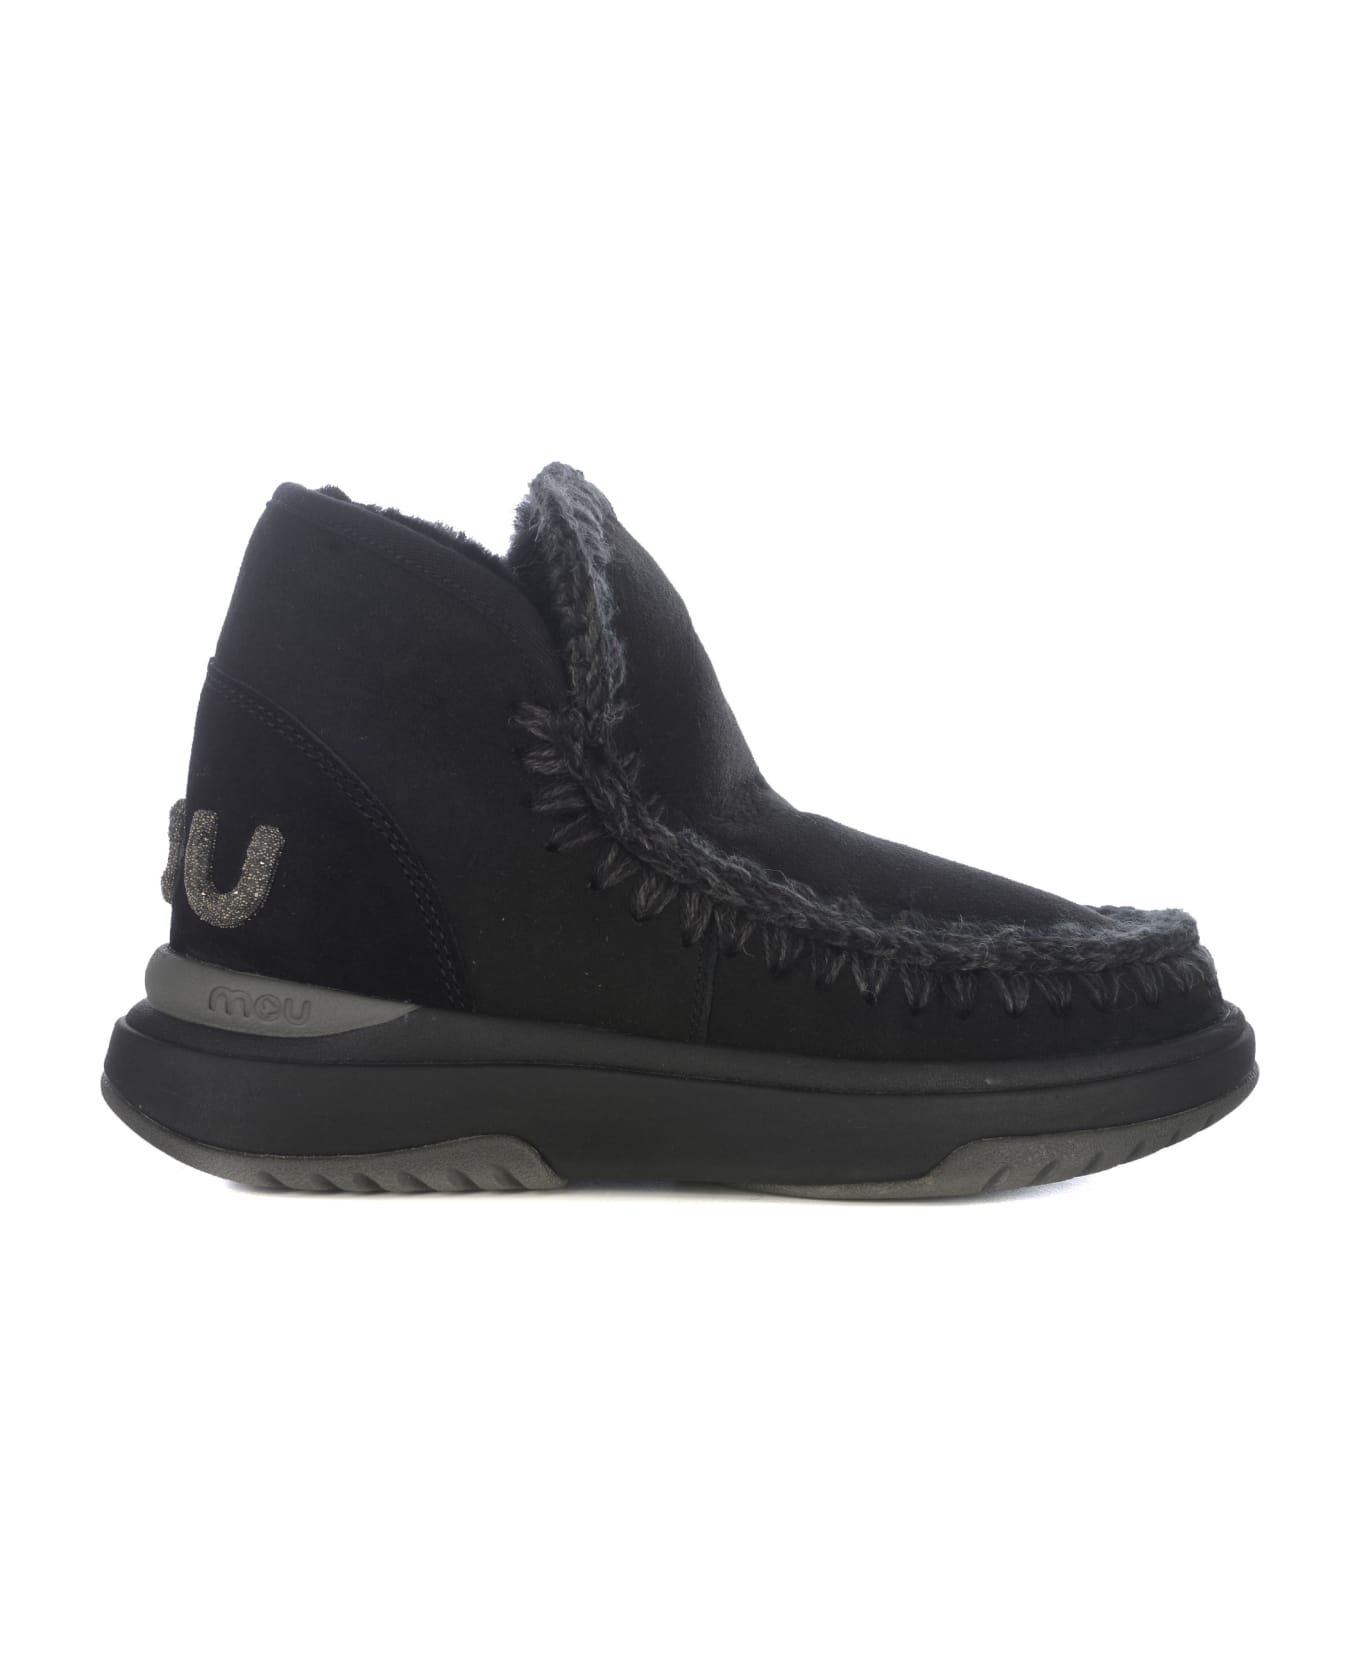 Mou Anckle Boots Mou "eskimo Jogger" Made Of Leather - Nero スニーカー